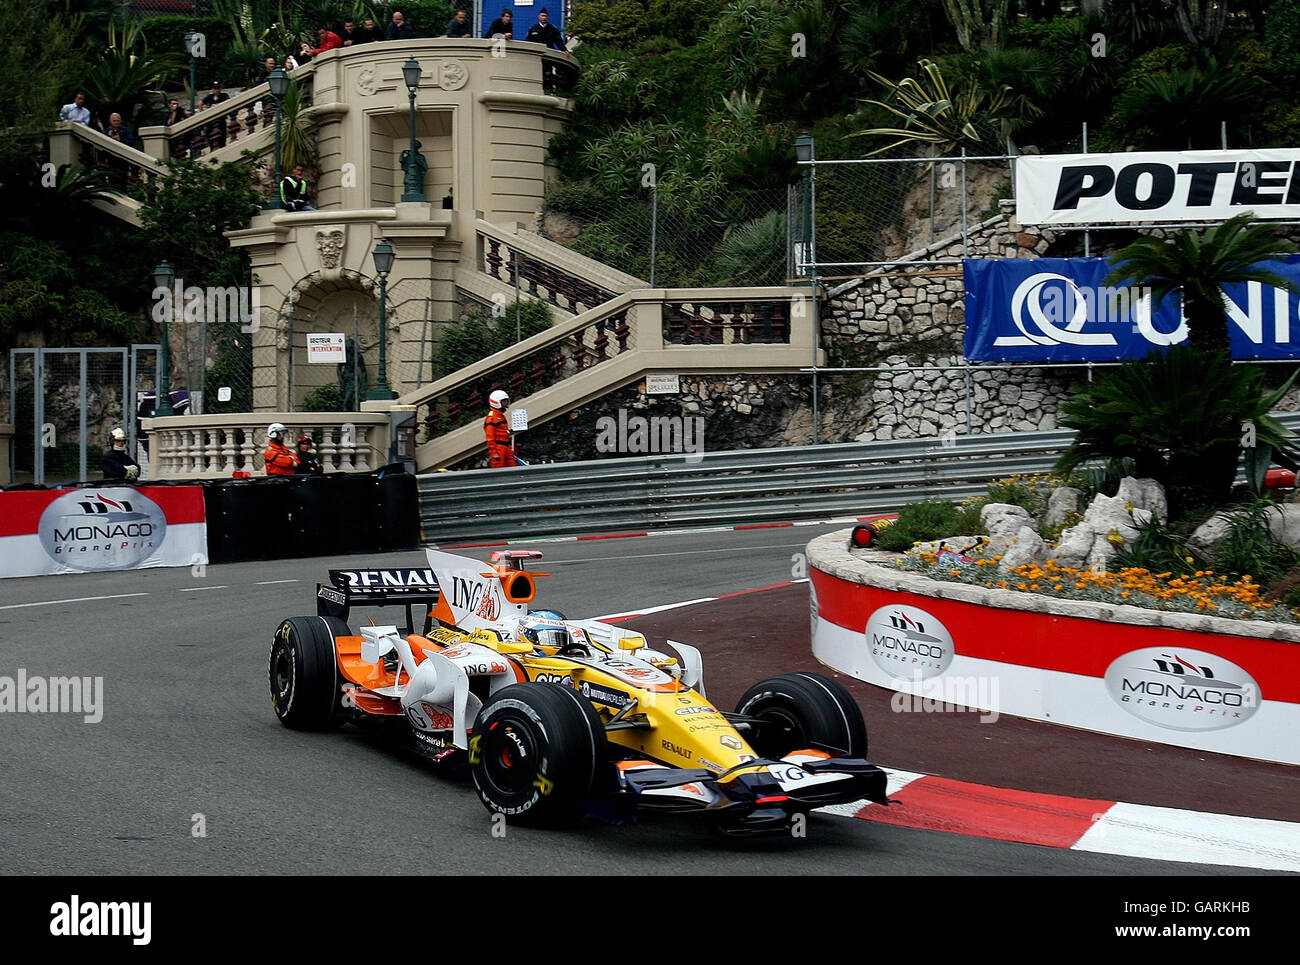 Formula One Motor Racing - Monaco Grand Prix - Qualifying - Monte Carlo. Fernando Alonso in the Renault rounds the Lowes Hairpin during Qualifying in Monte Carlo, Monaco. Stock Photo